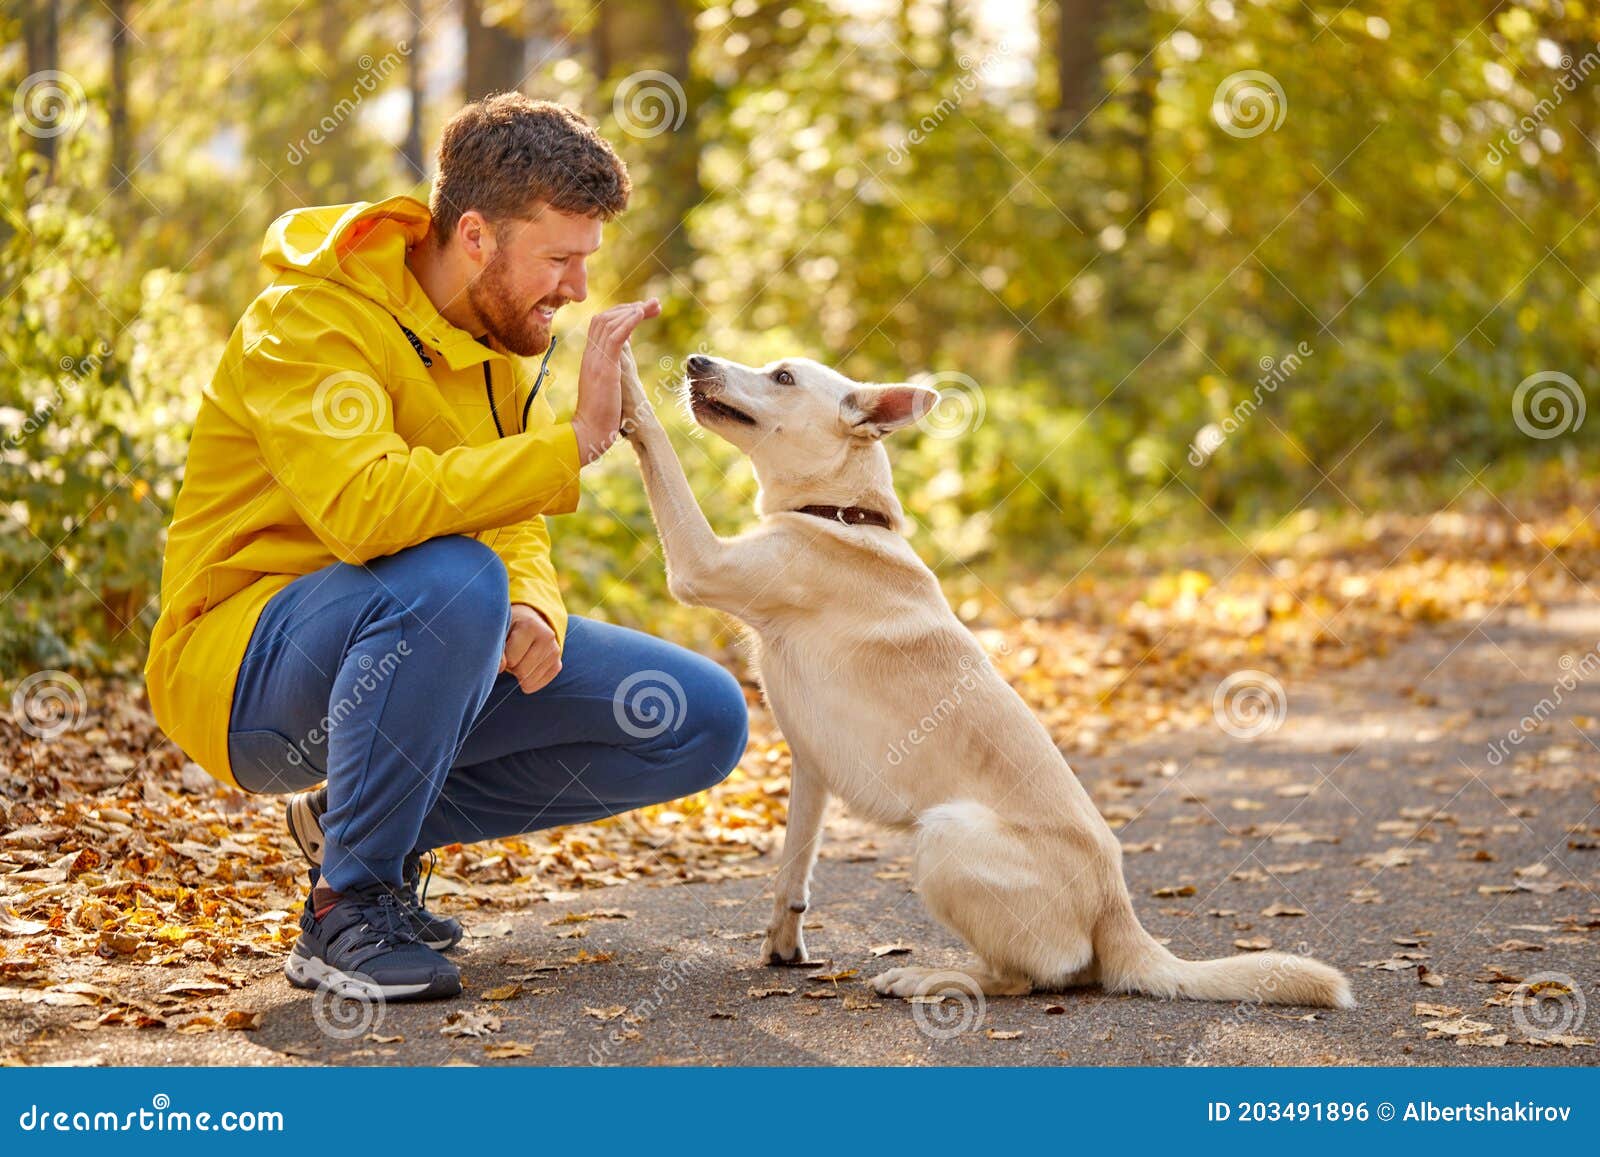 Side View on Friendly Man Playing with Dog in the Nature Stock Photo -  Image of outdoor, outdoors: 203491896